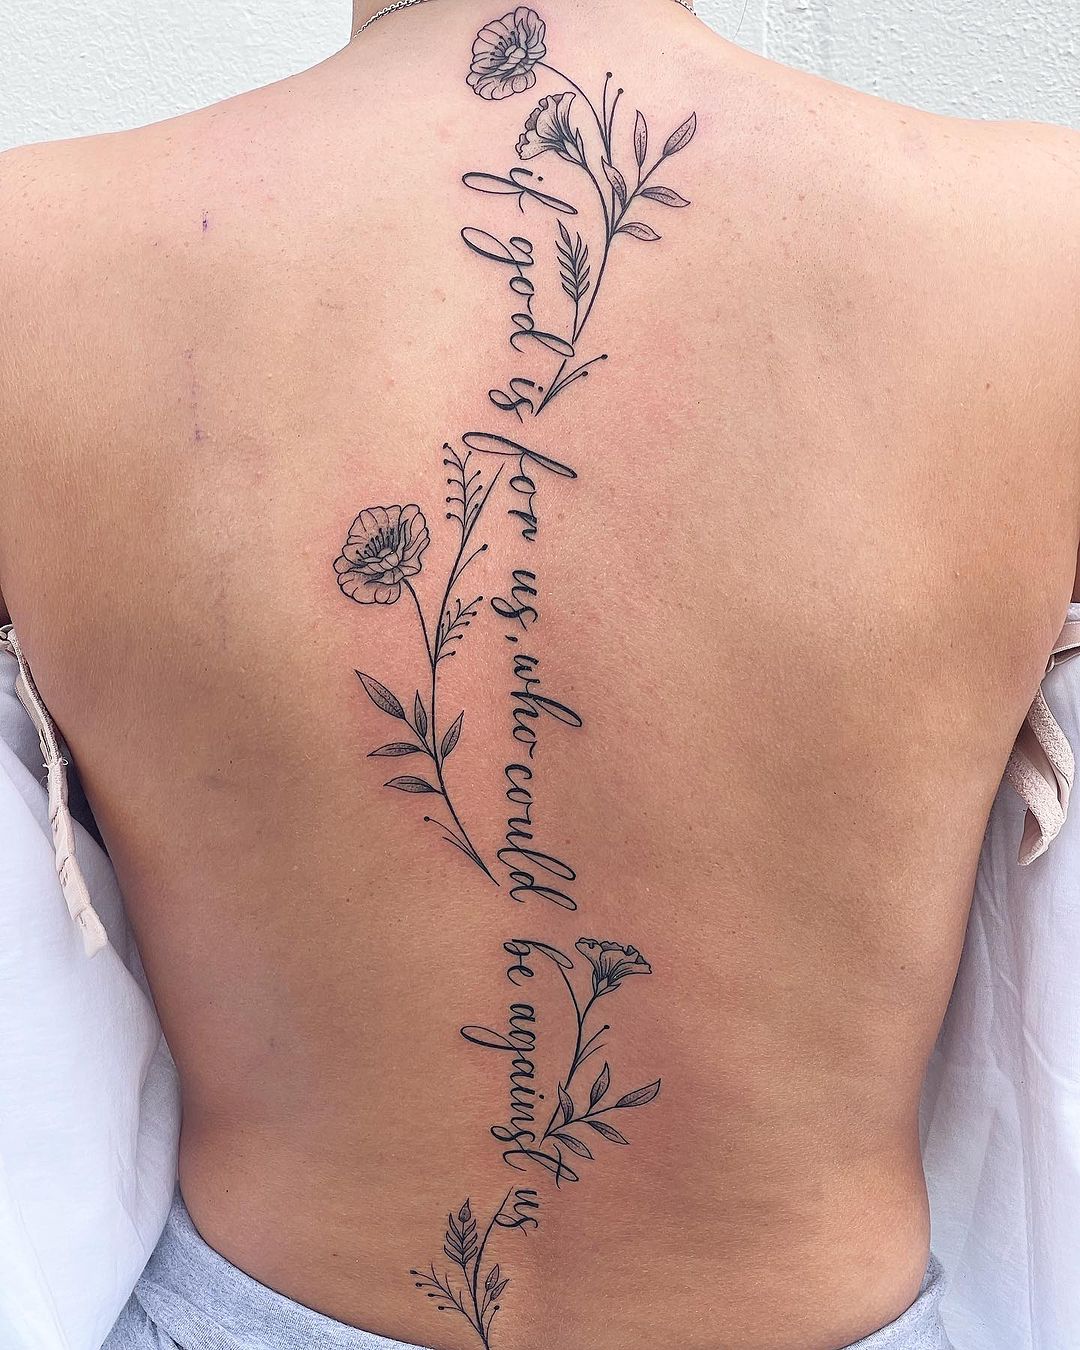 Floral Vine Bible Verse Tattoos For Females On The Back